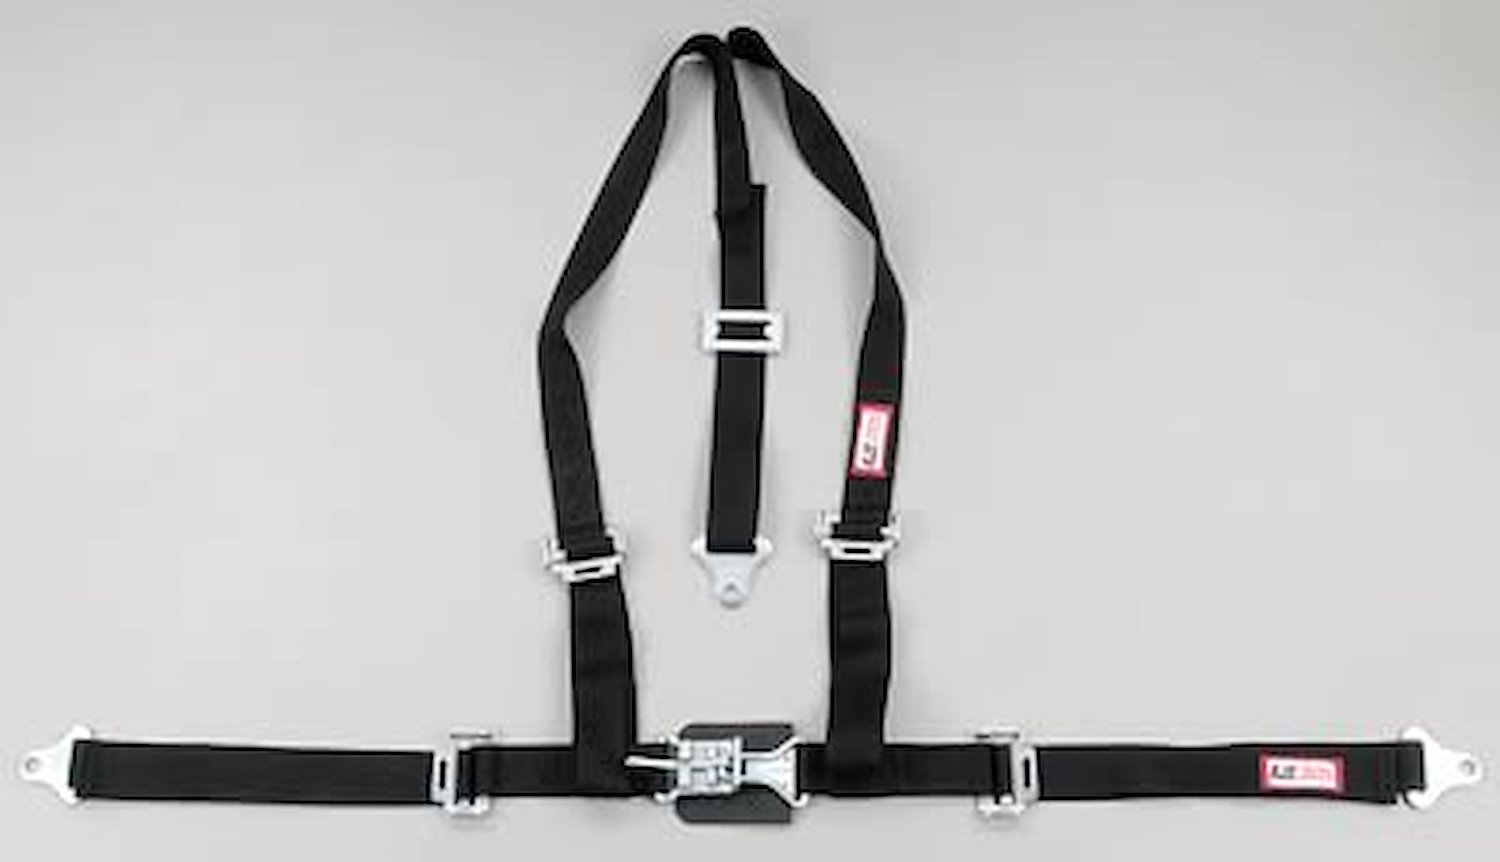 NON-SFI L&L HARNESS 3 PULL UP Lap Belt SNAP SEWN IN 2 S.H. Individual FLOOR Mount w/STERNUM STRAP WRAP/BOLT PURPLE